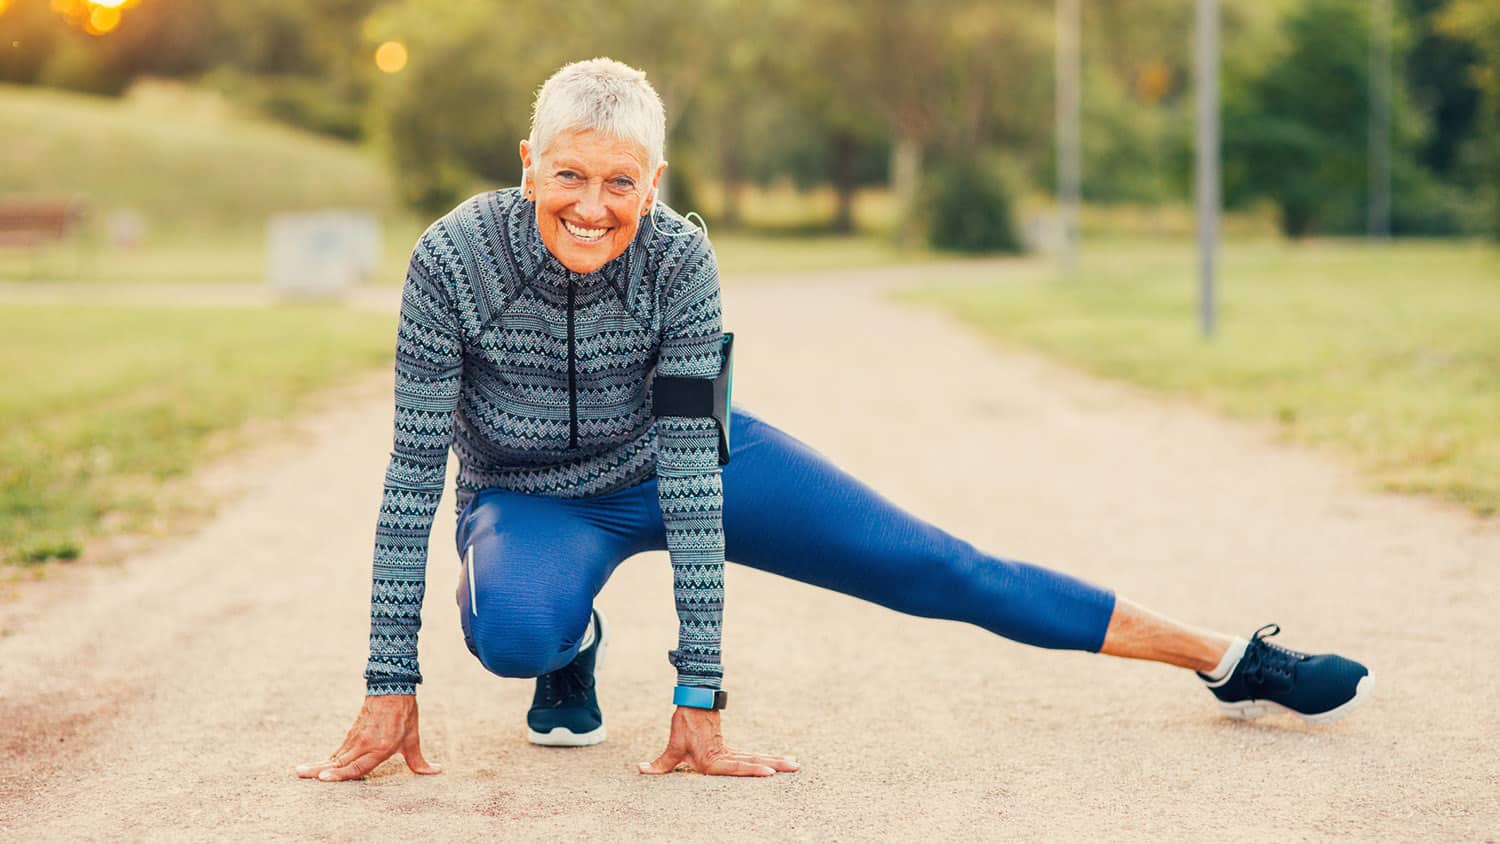 https://cdn.sixtyandme.com/wp-content/uploads/2017/10/Sixty-and-Me_Ageism-and-Fitness-Clothing-Industry.jpg